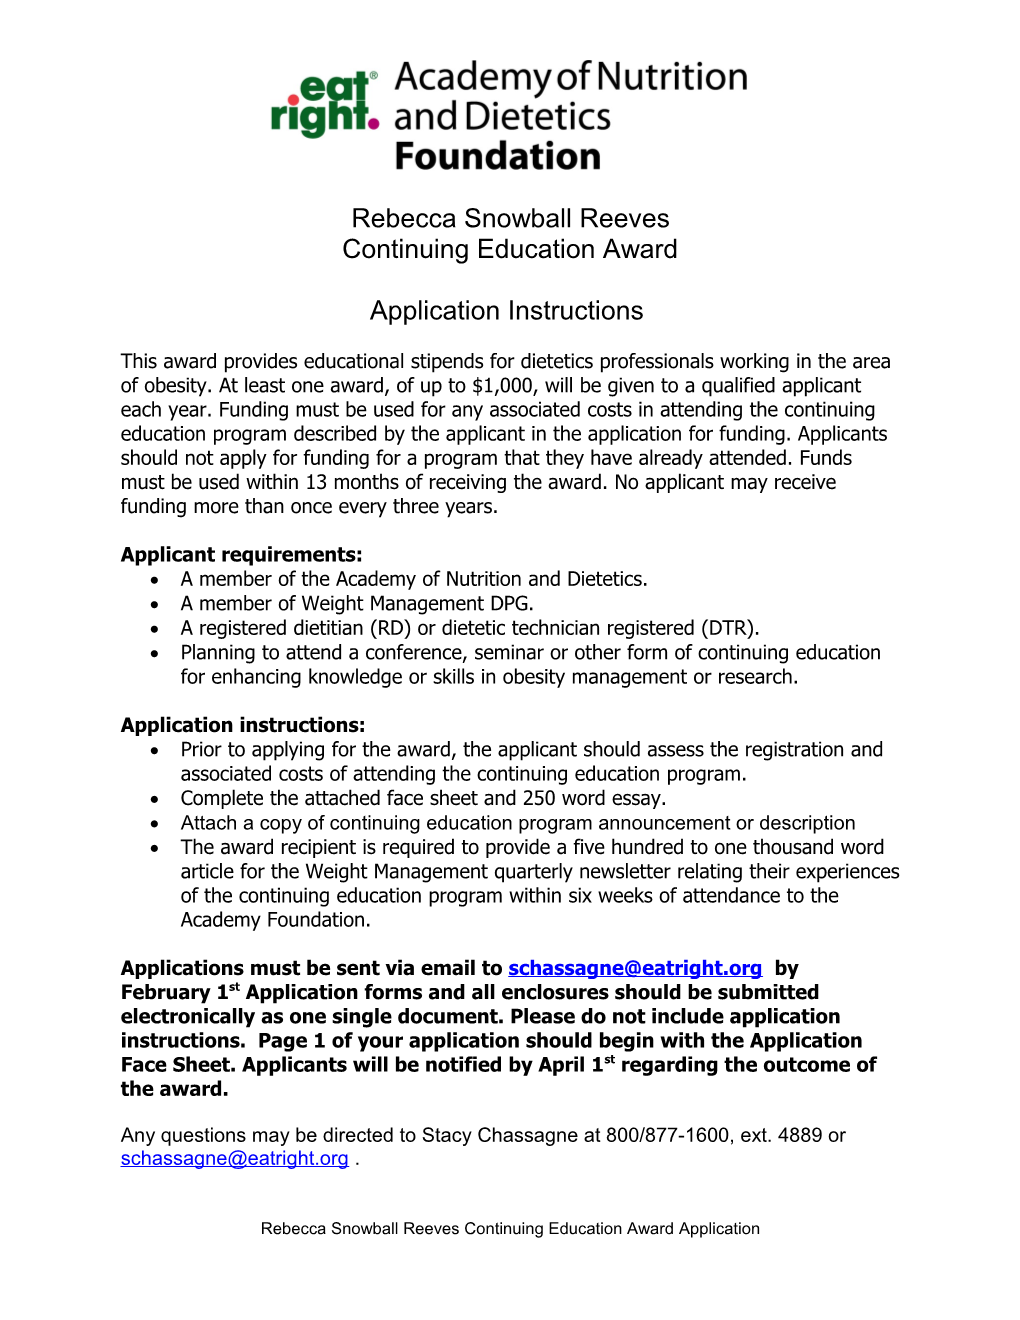 First International Nutritionist/Dietitian (FIND) Fellowship Fund for Study in the USA